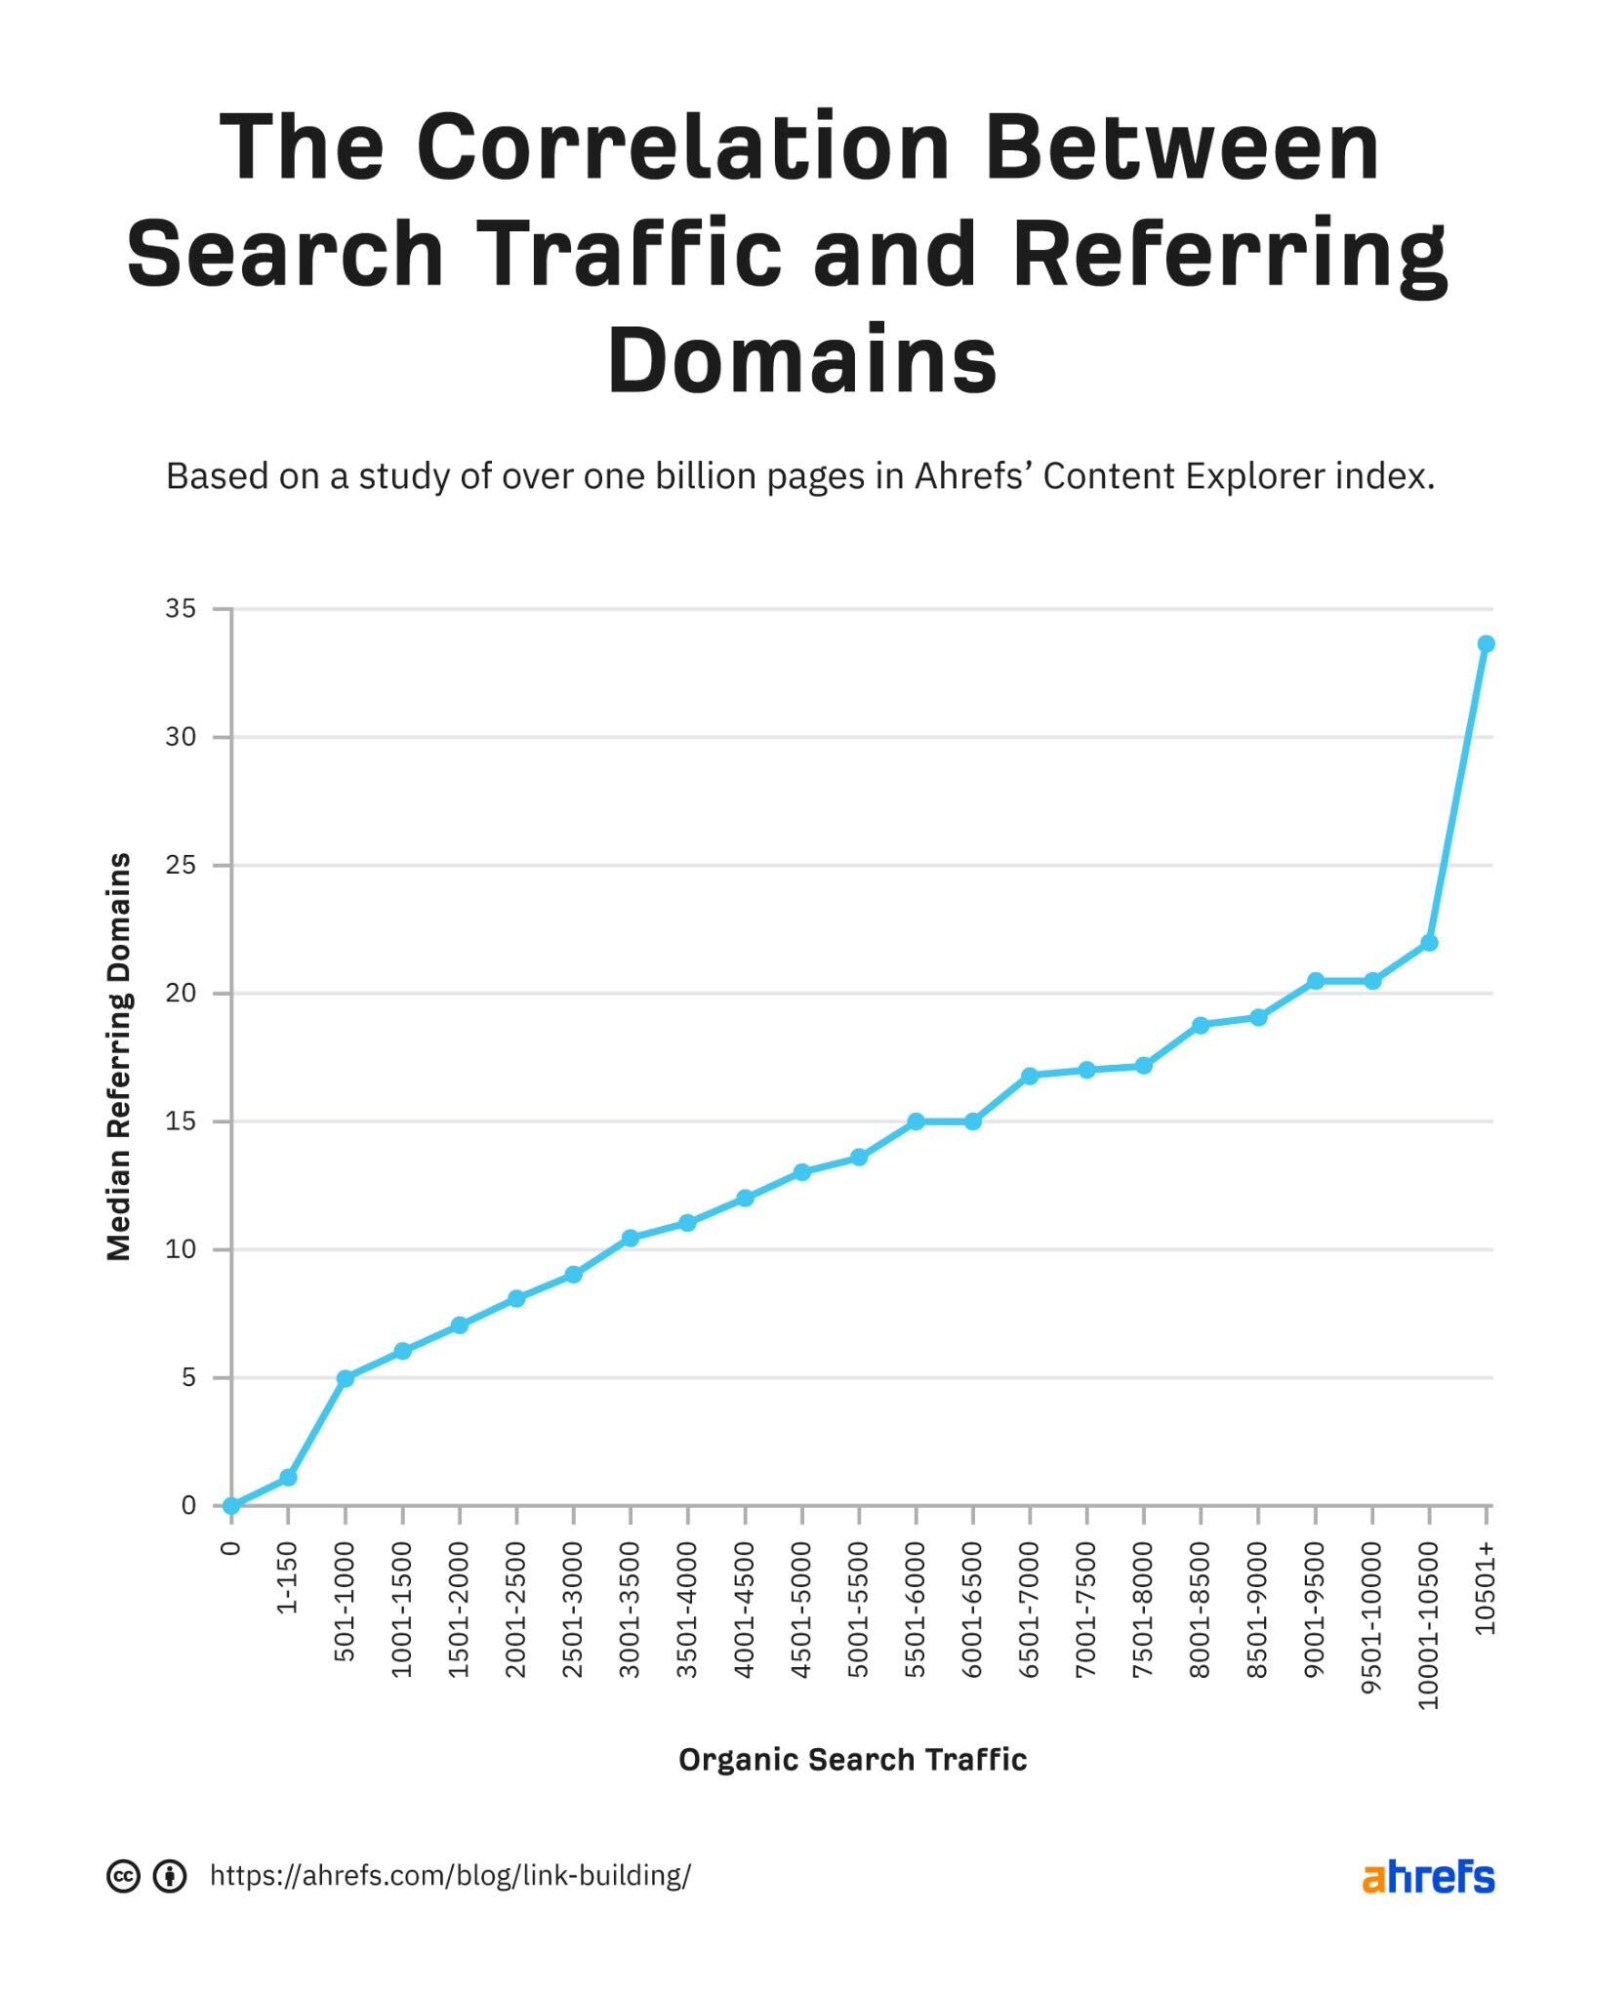 graph depicting the correlation between search traffic and referring domains